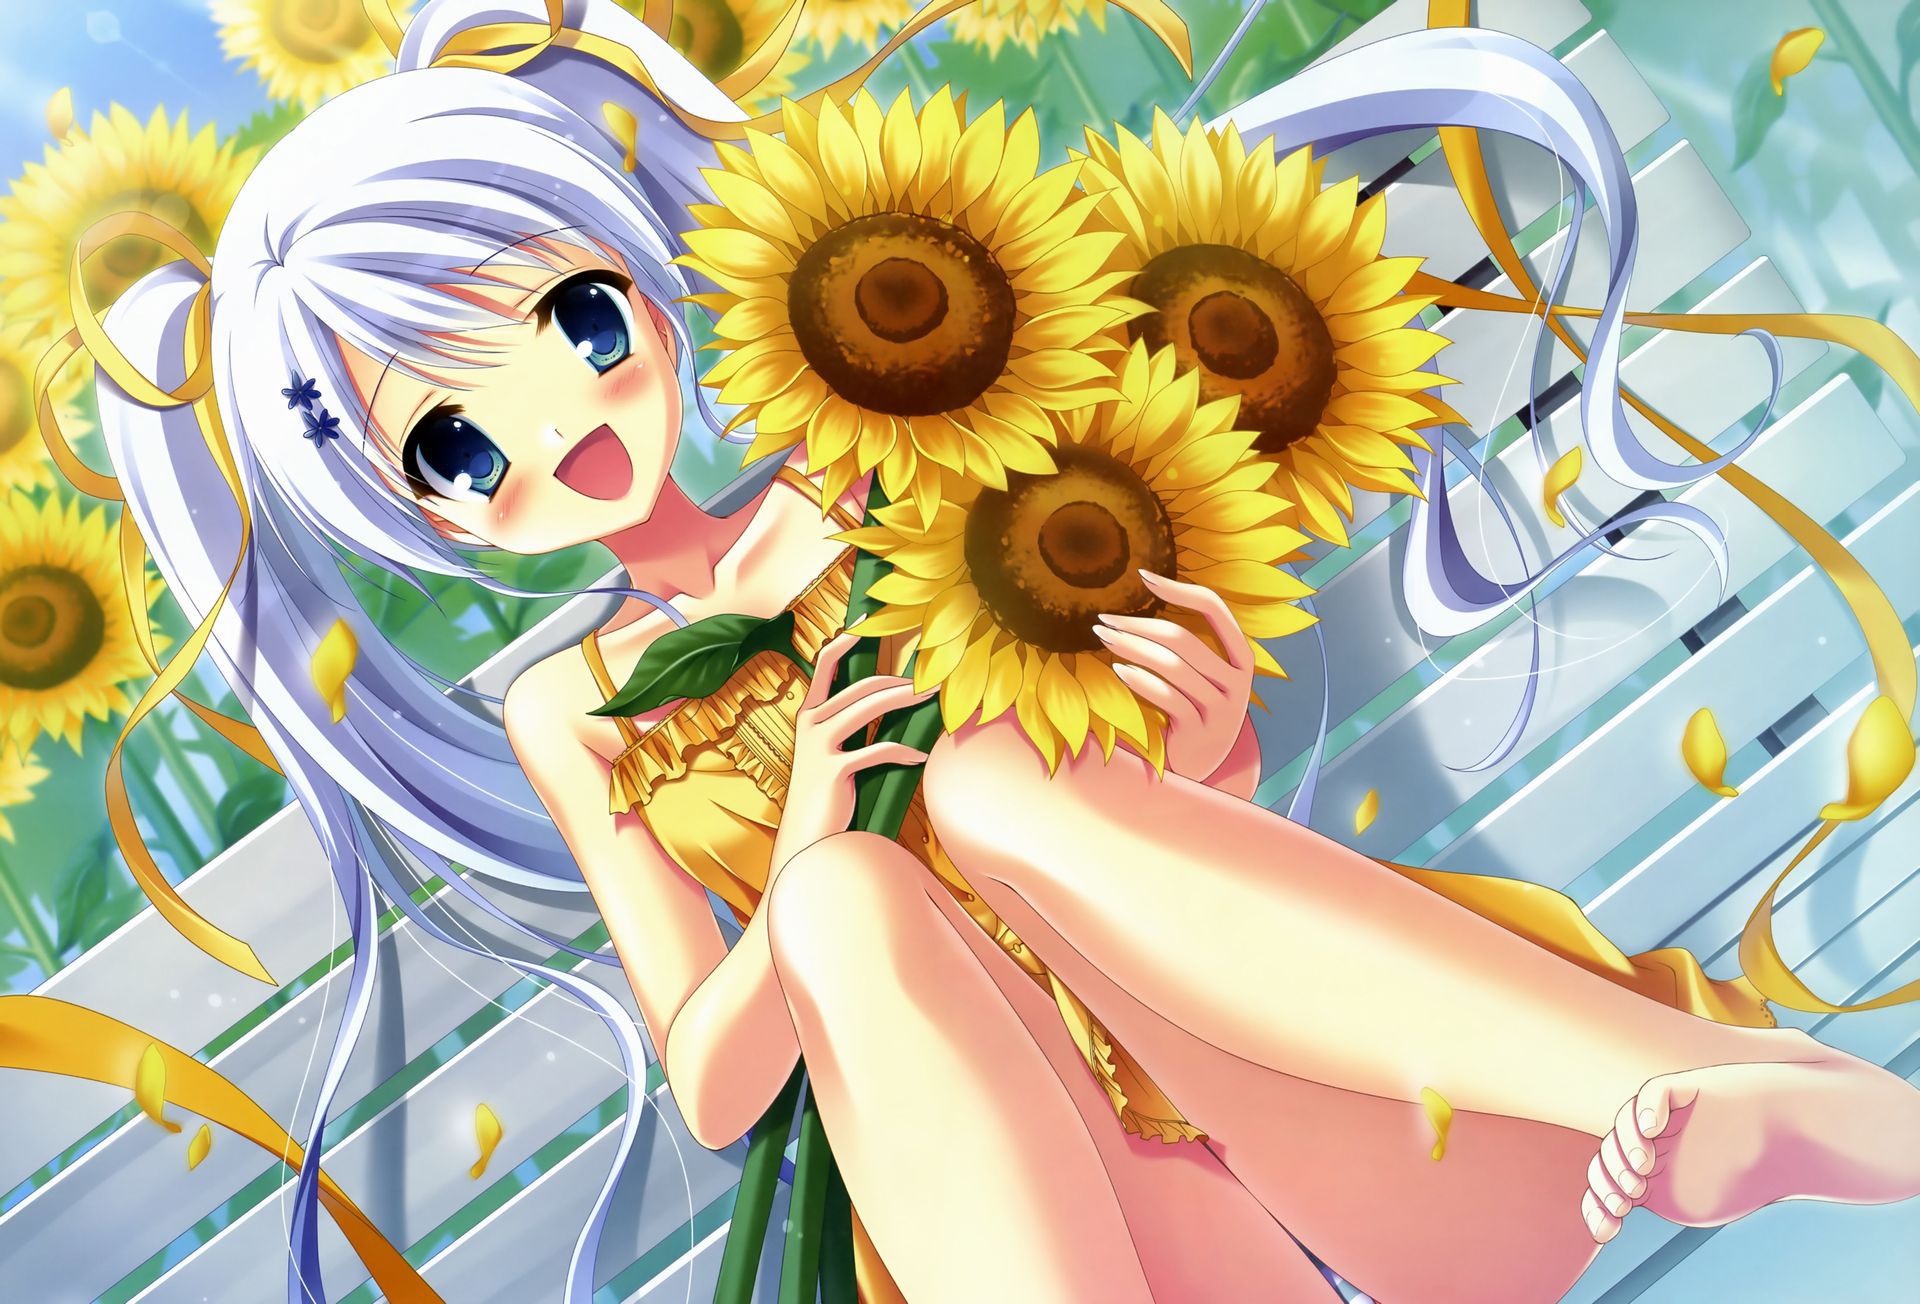 [Secondary, ZIP] summer 2: girl with a sunflower or image summary 37